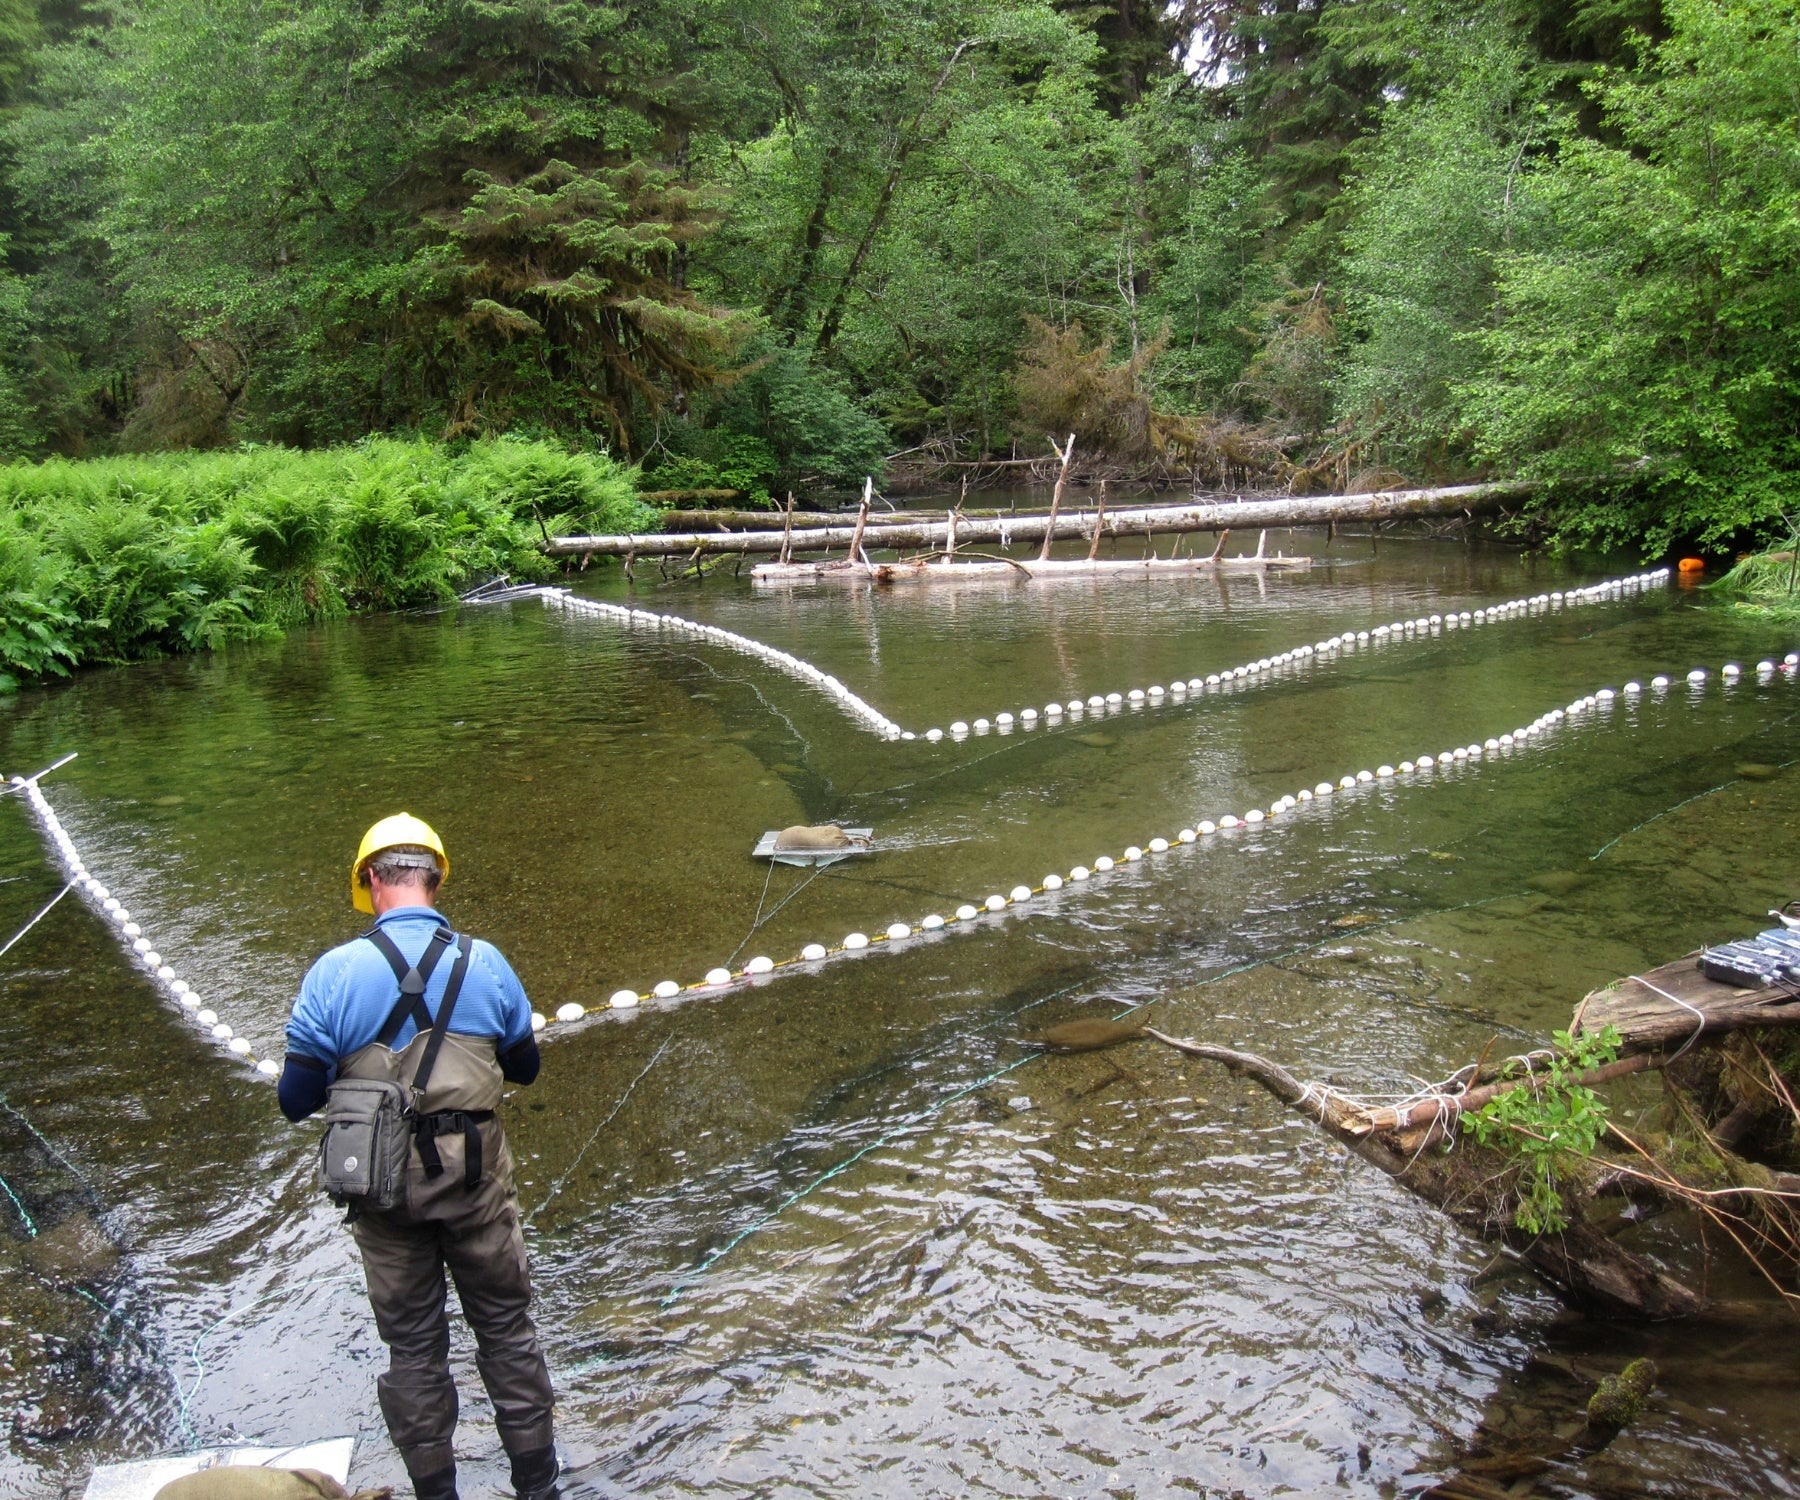 Custom research netting being used by NOAA member